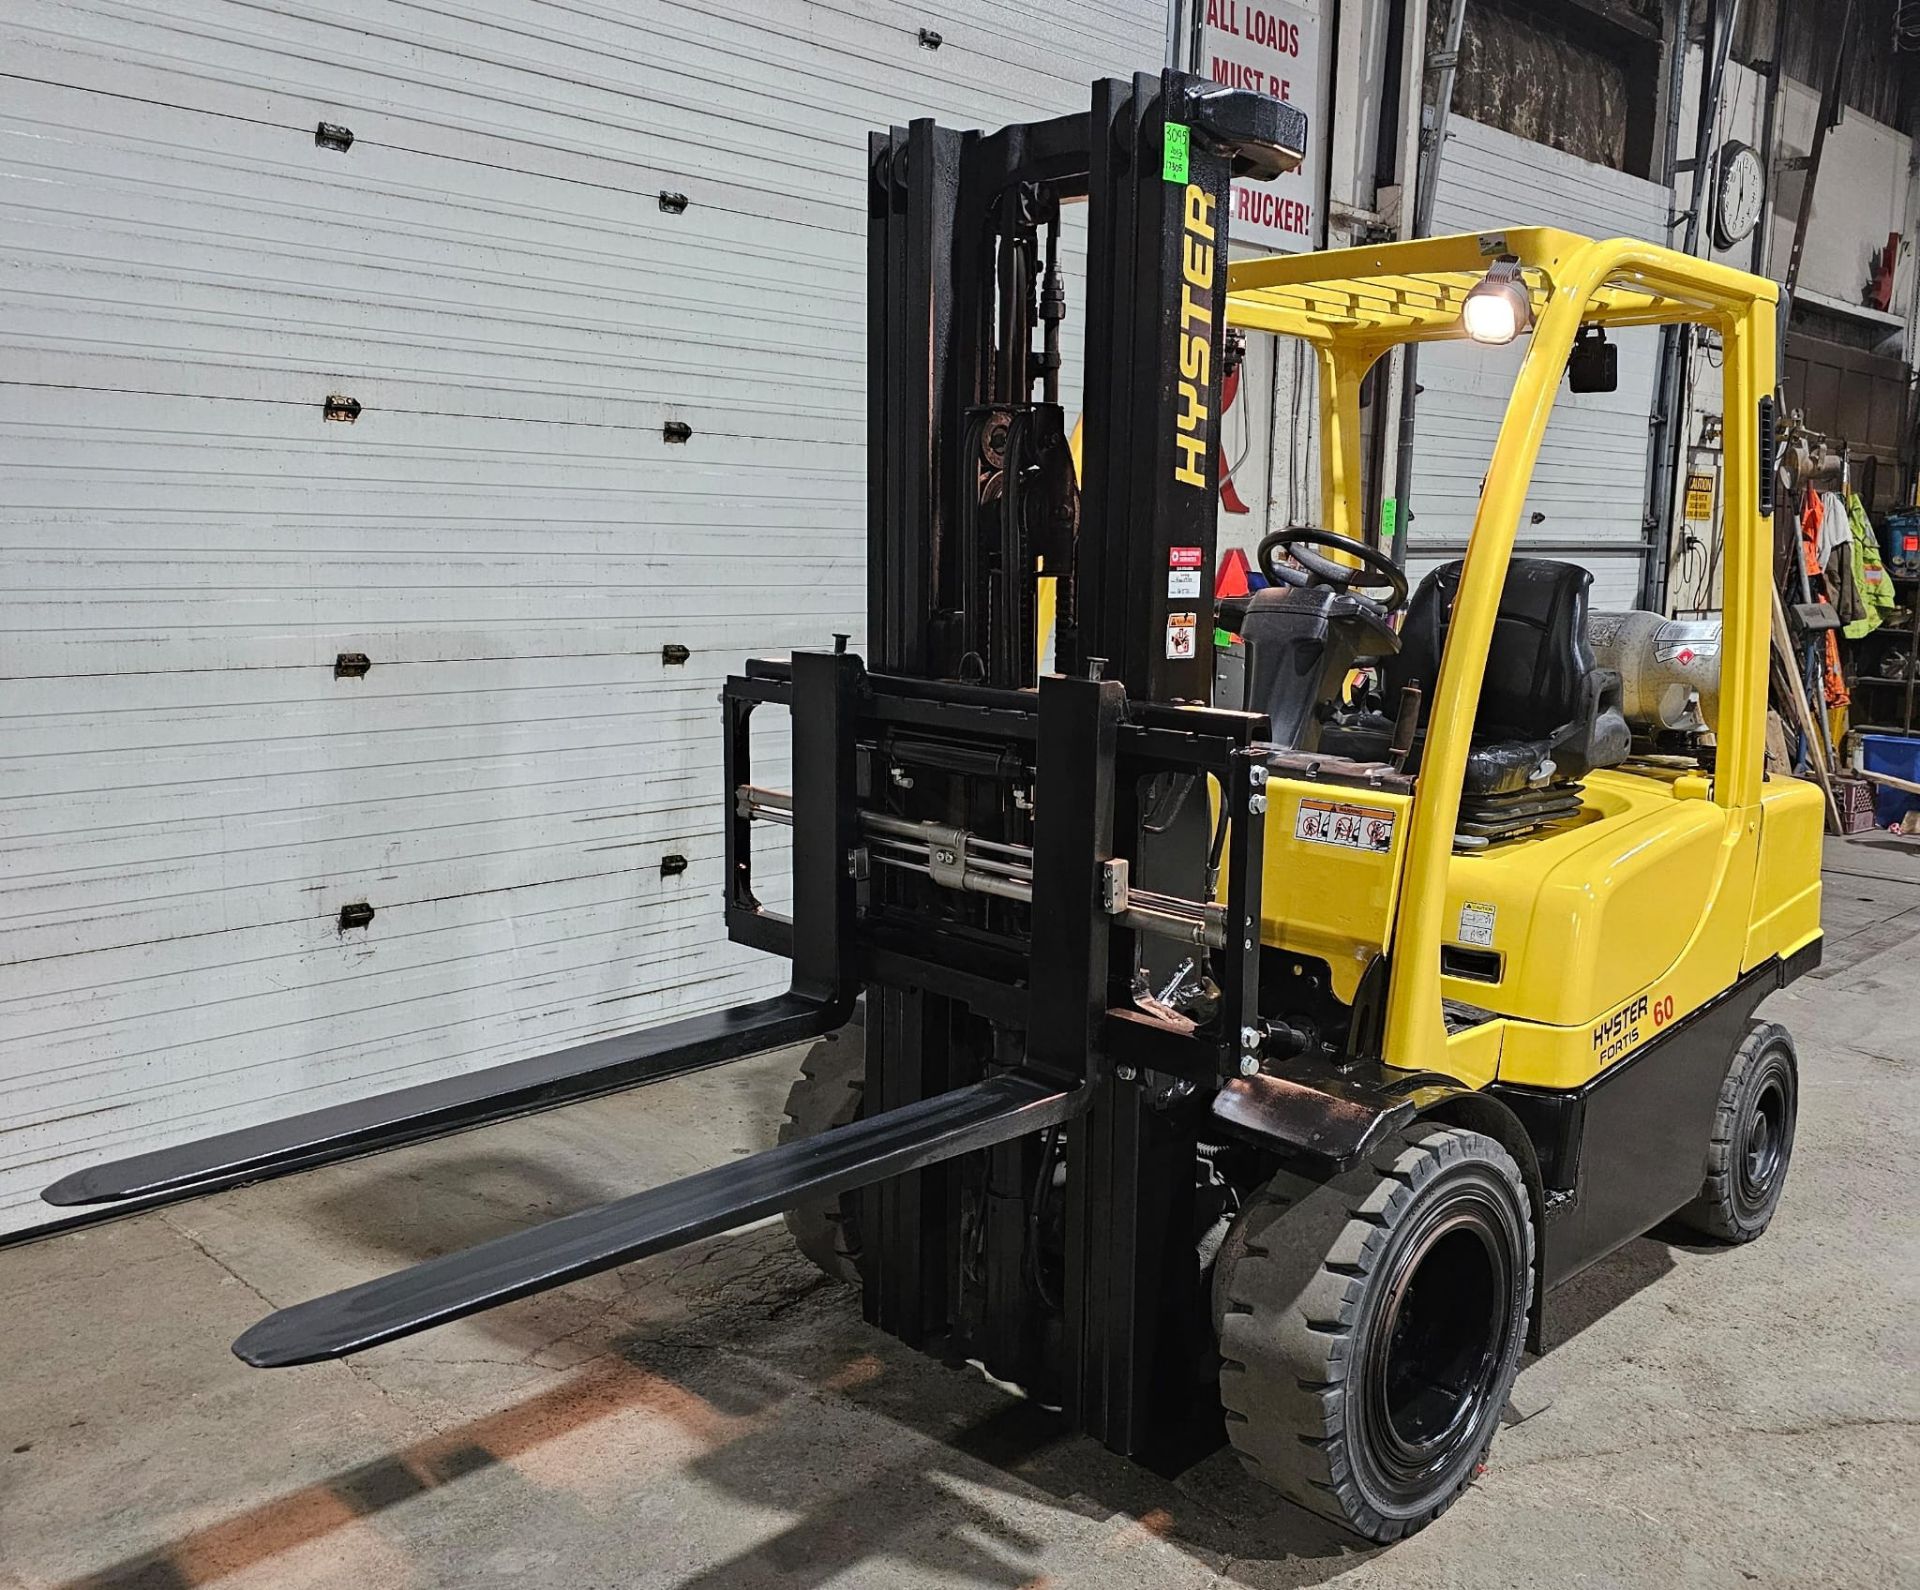 2013 Hyster 6,000lbs Capacity LPG (Propane) OUTDOOR Forklift 3-STAGE MAST 187" load height sideshift - Image 6 of 7